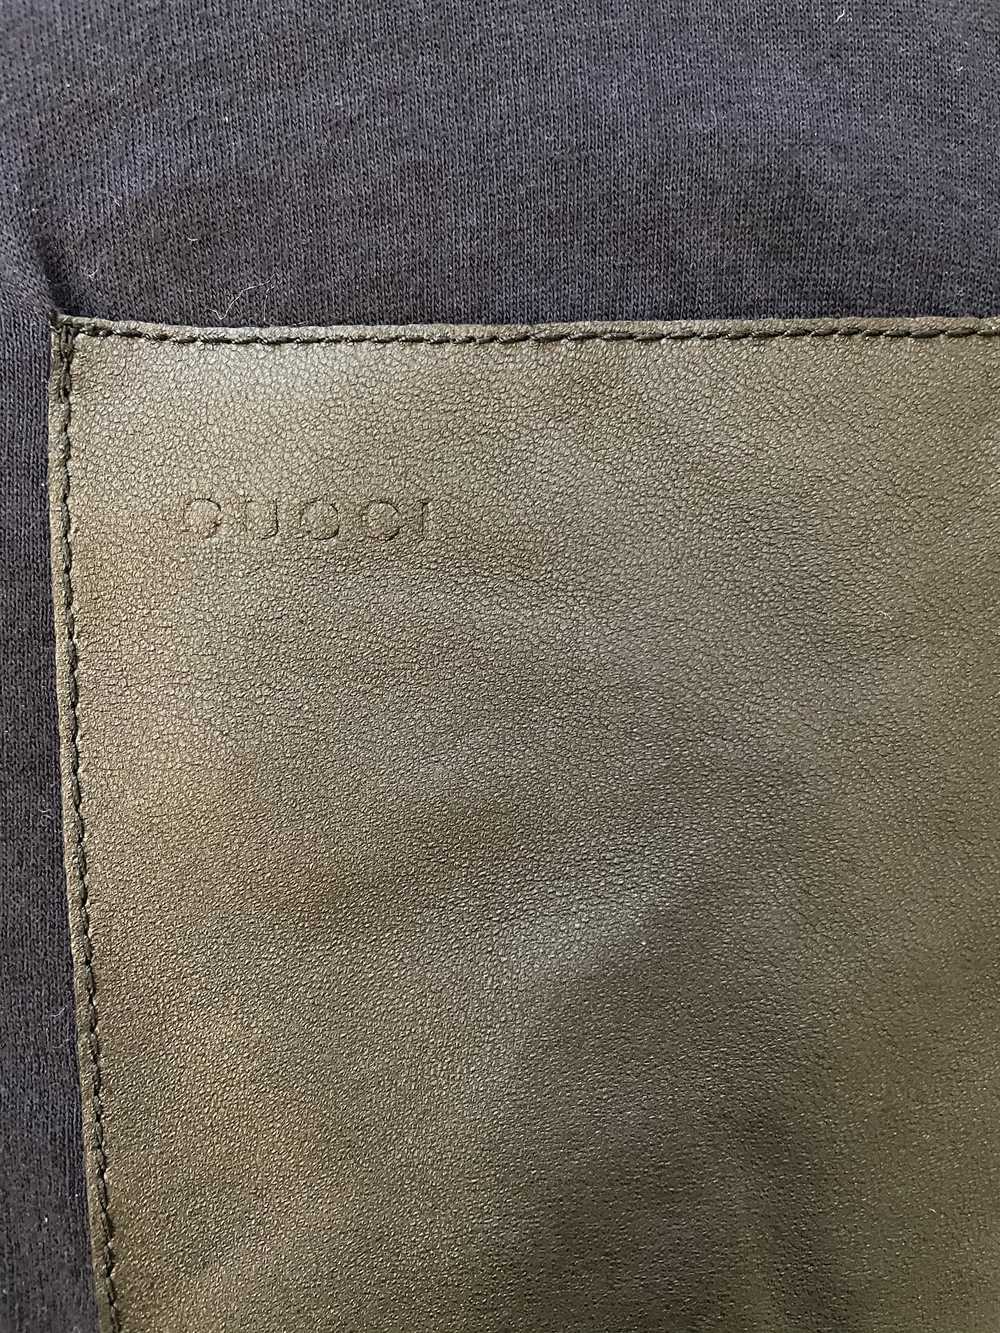 Gucci Gucci t shirt with leather pocket - image 3